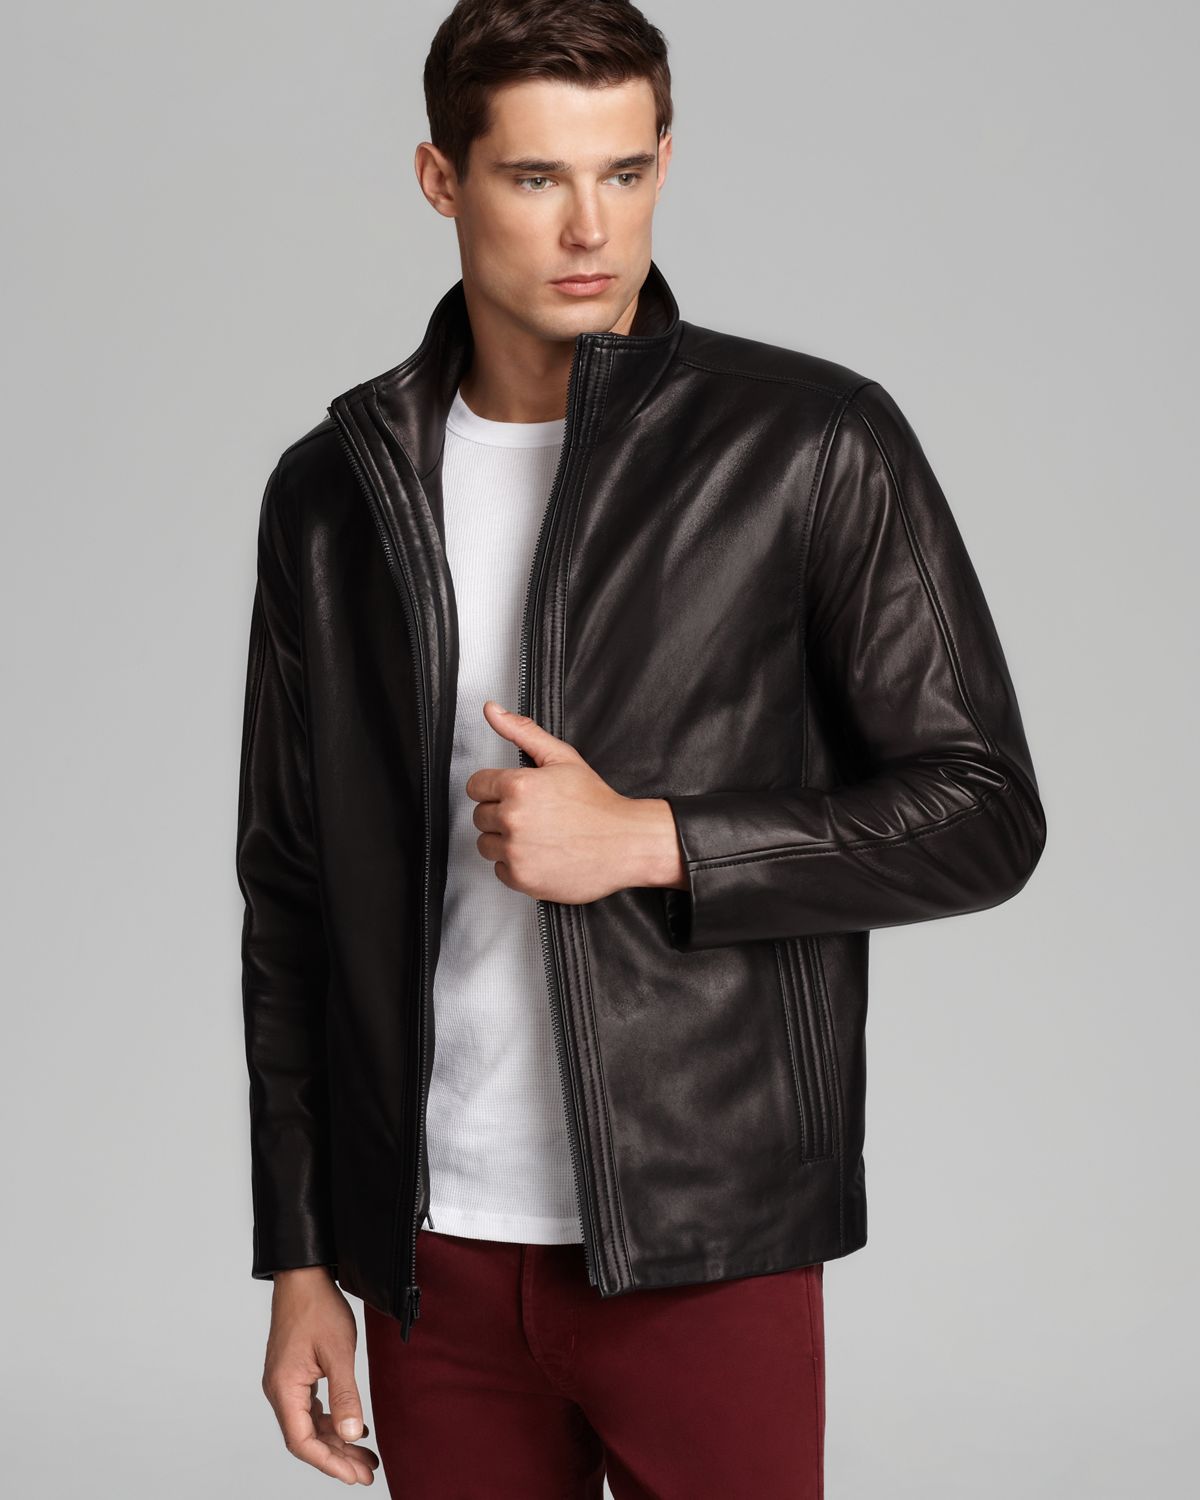 Marc New York by Andrew Marc Mens Light Weight Bomber Jacket 